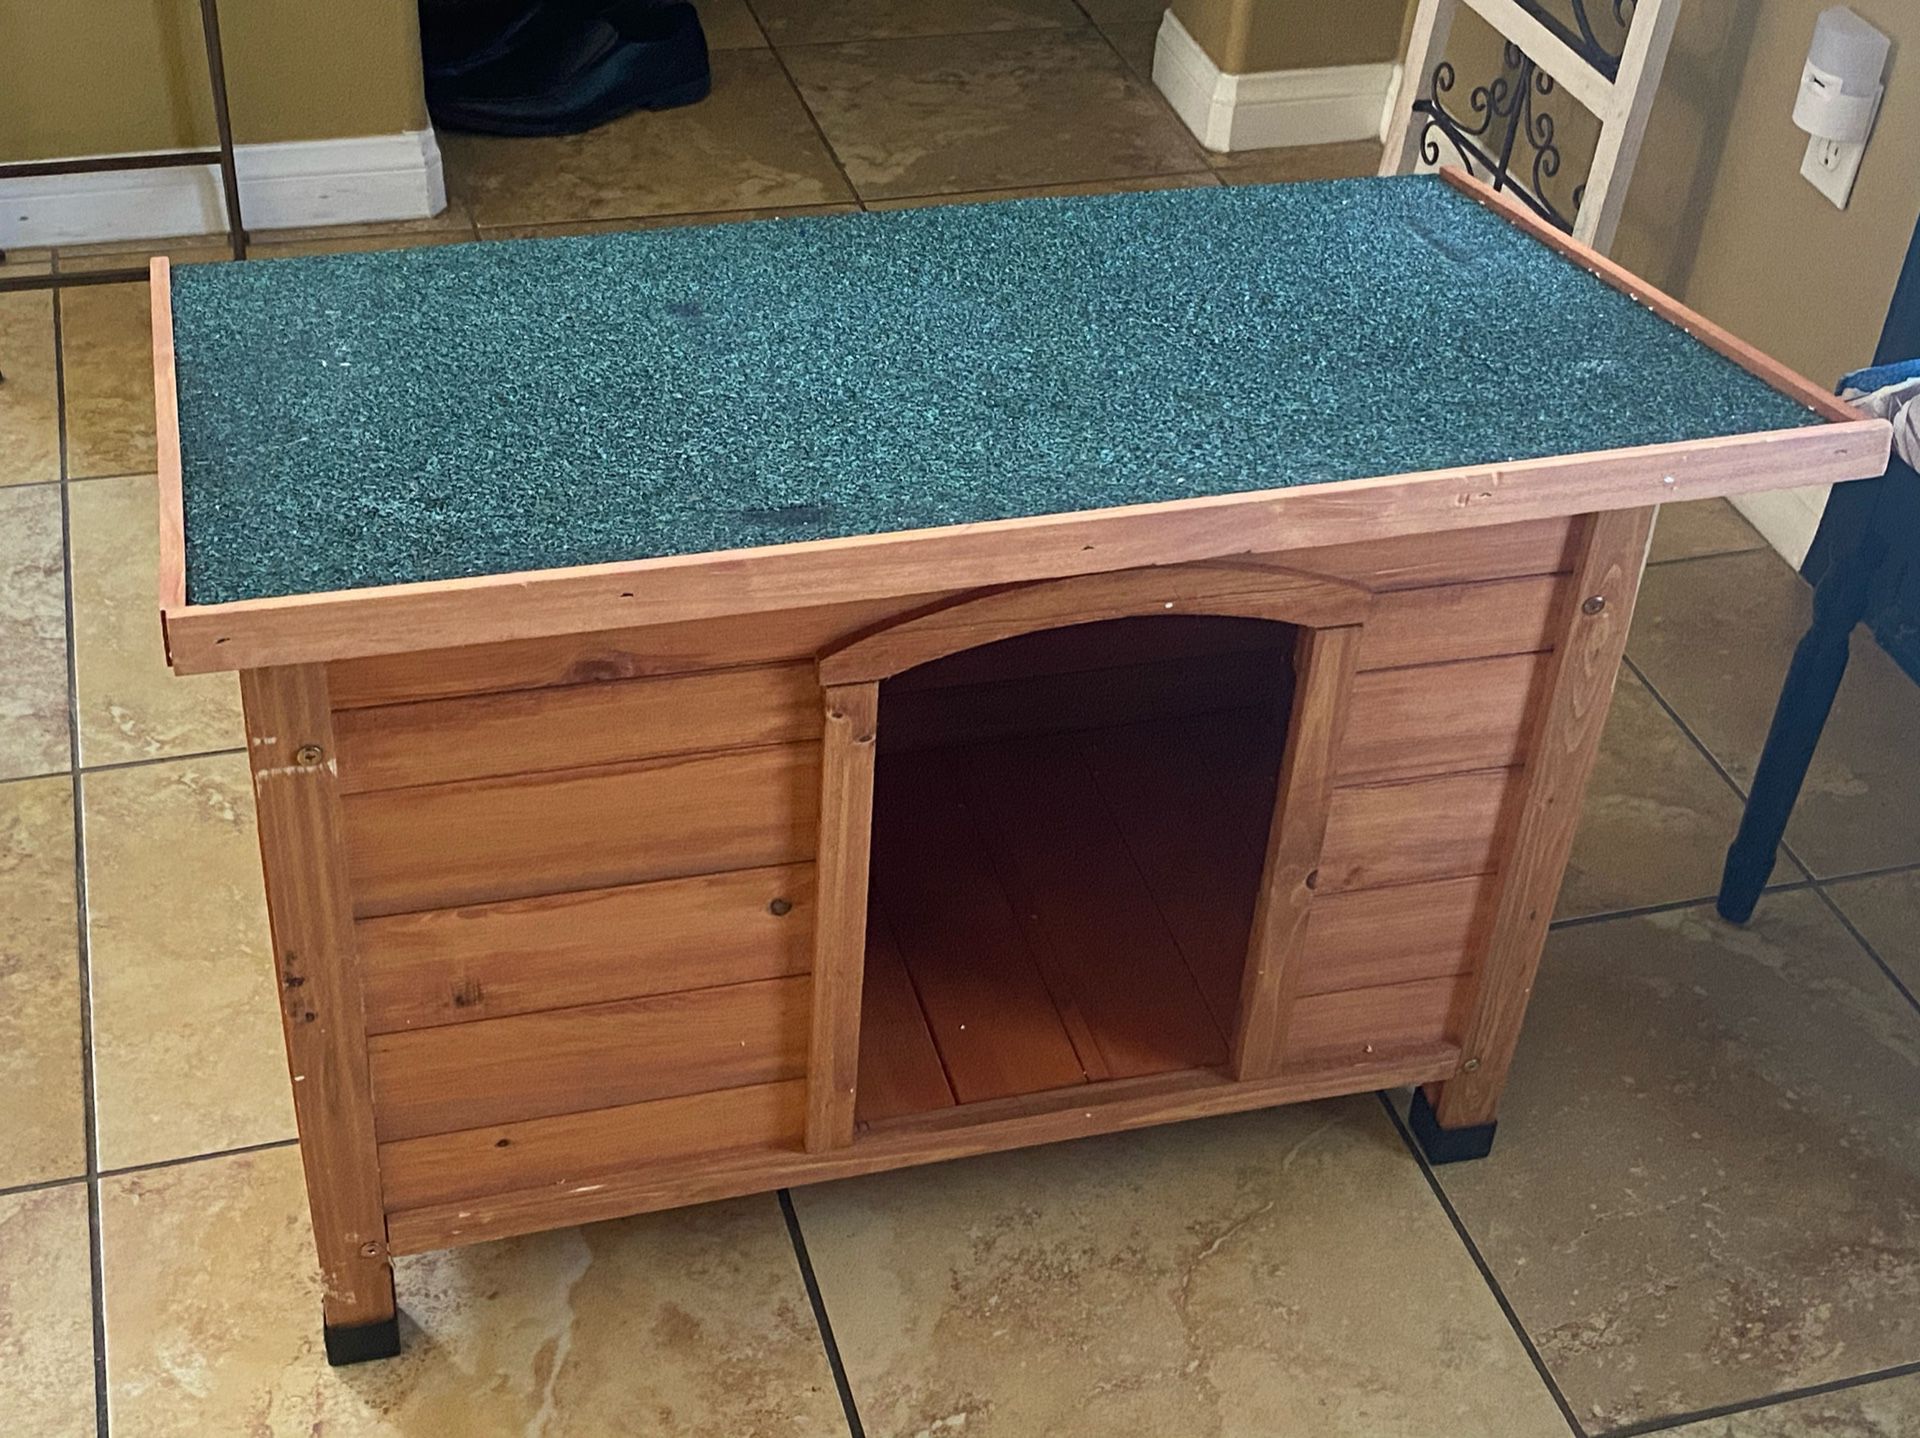 Dog house for small dog